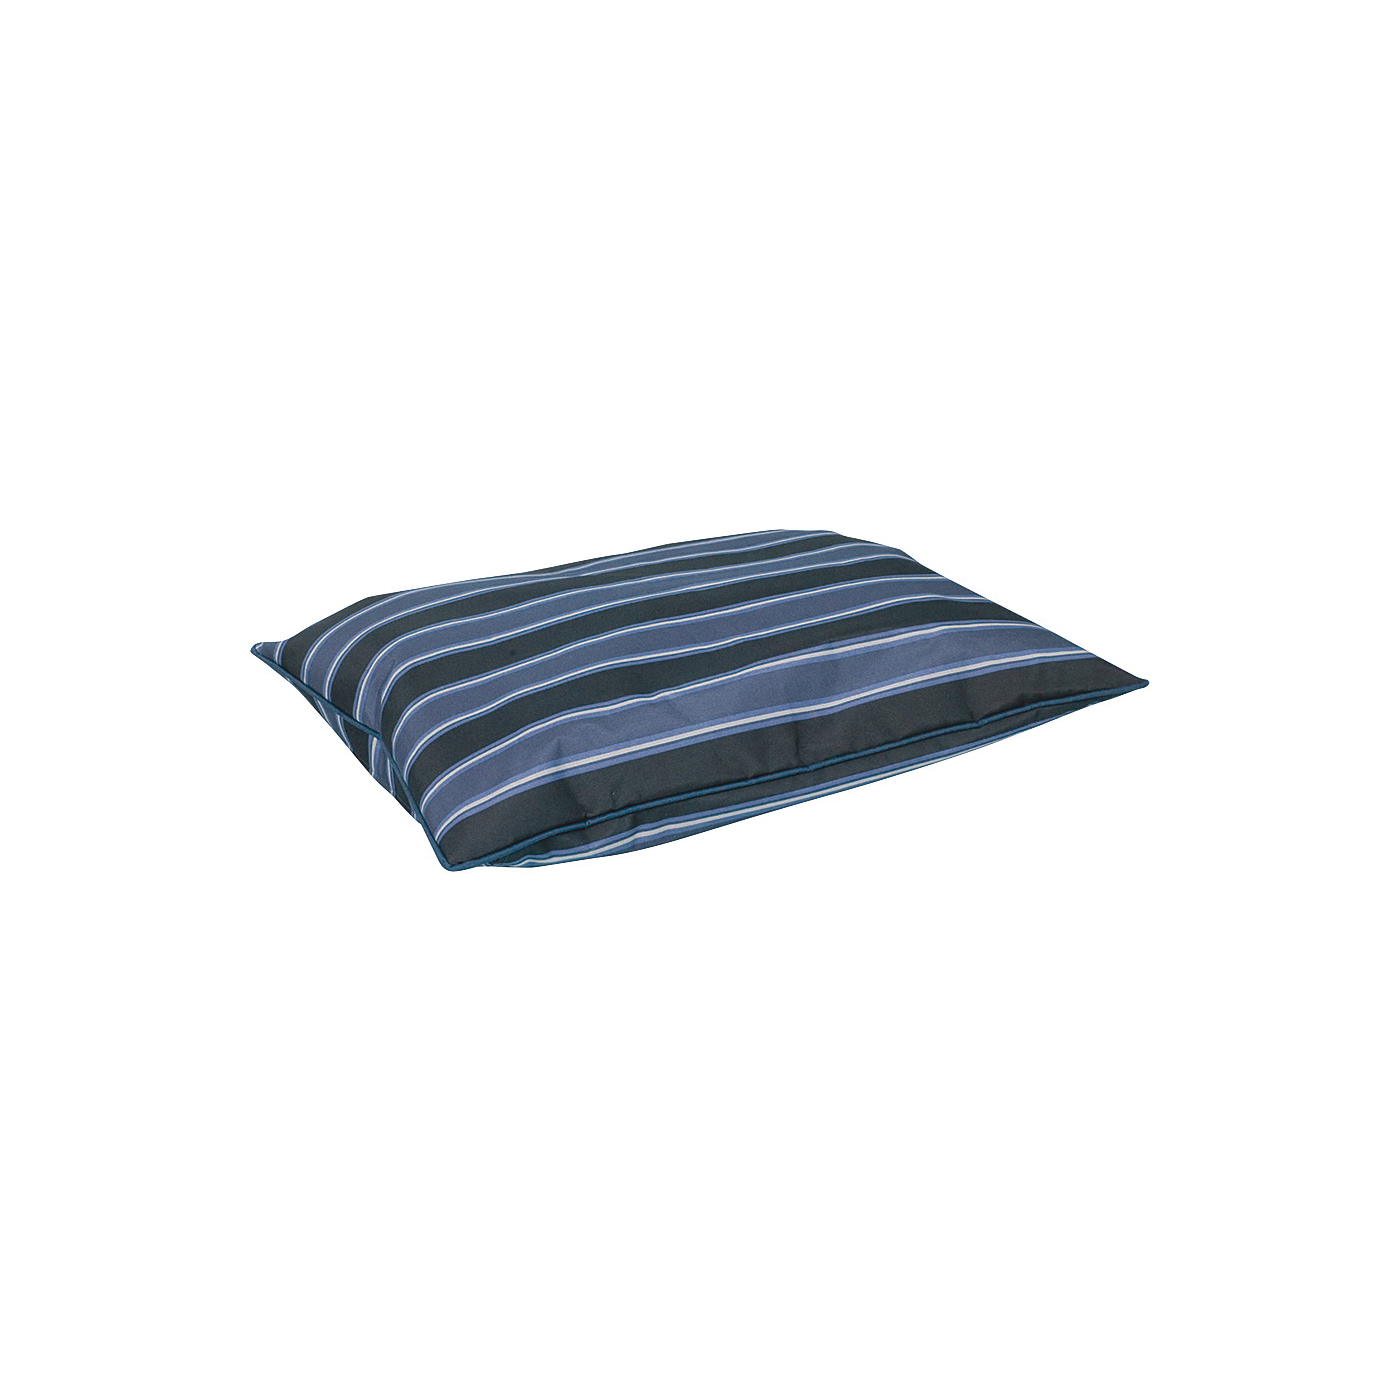 26548 Pillow Bed, 27 in L, 36 in W, Polyester Fill, Fabric/PVC Cover, Assorted